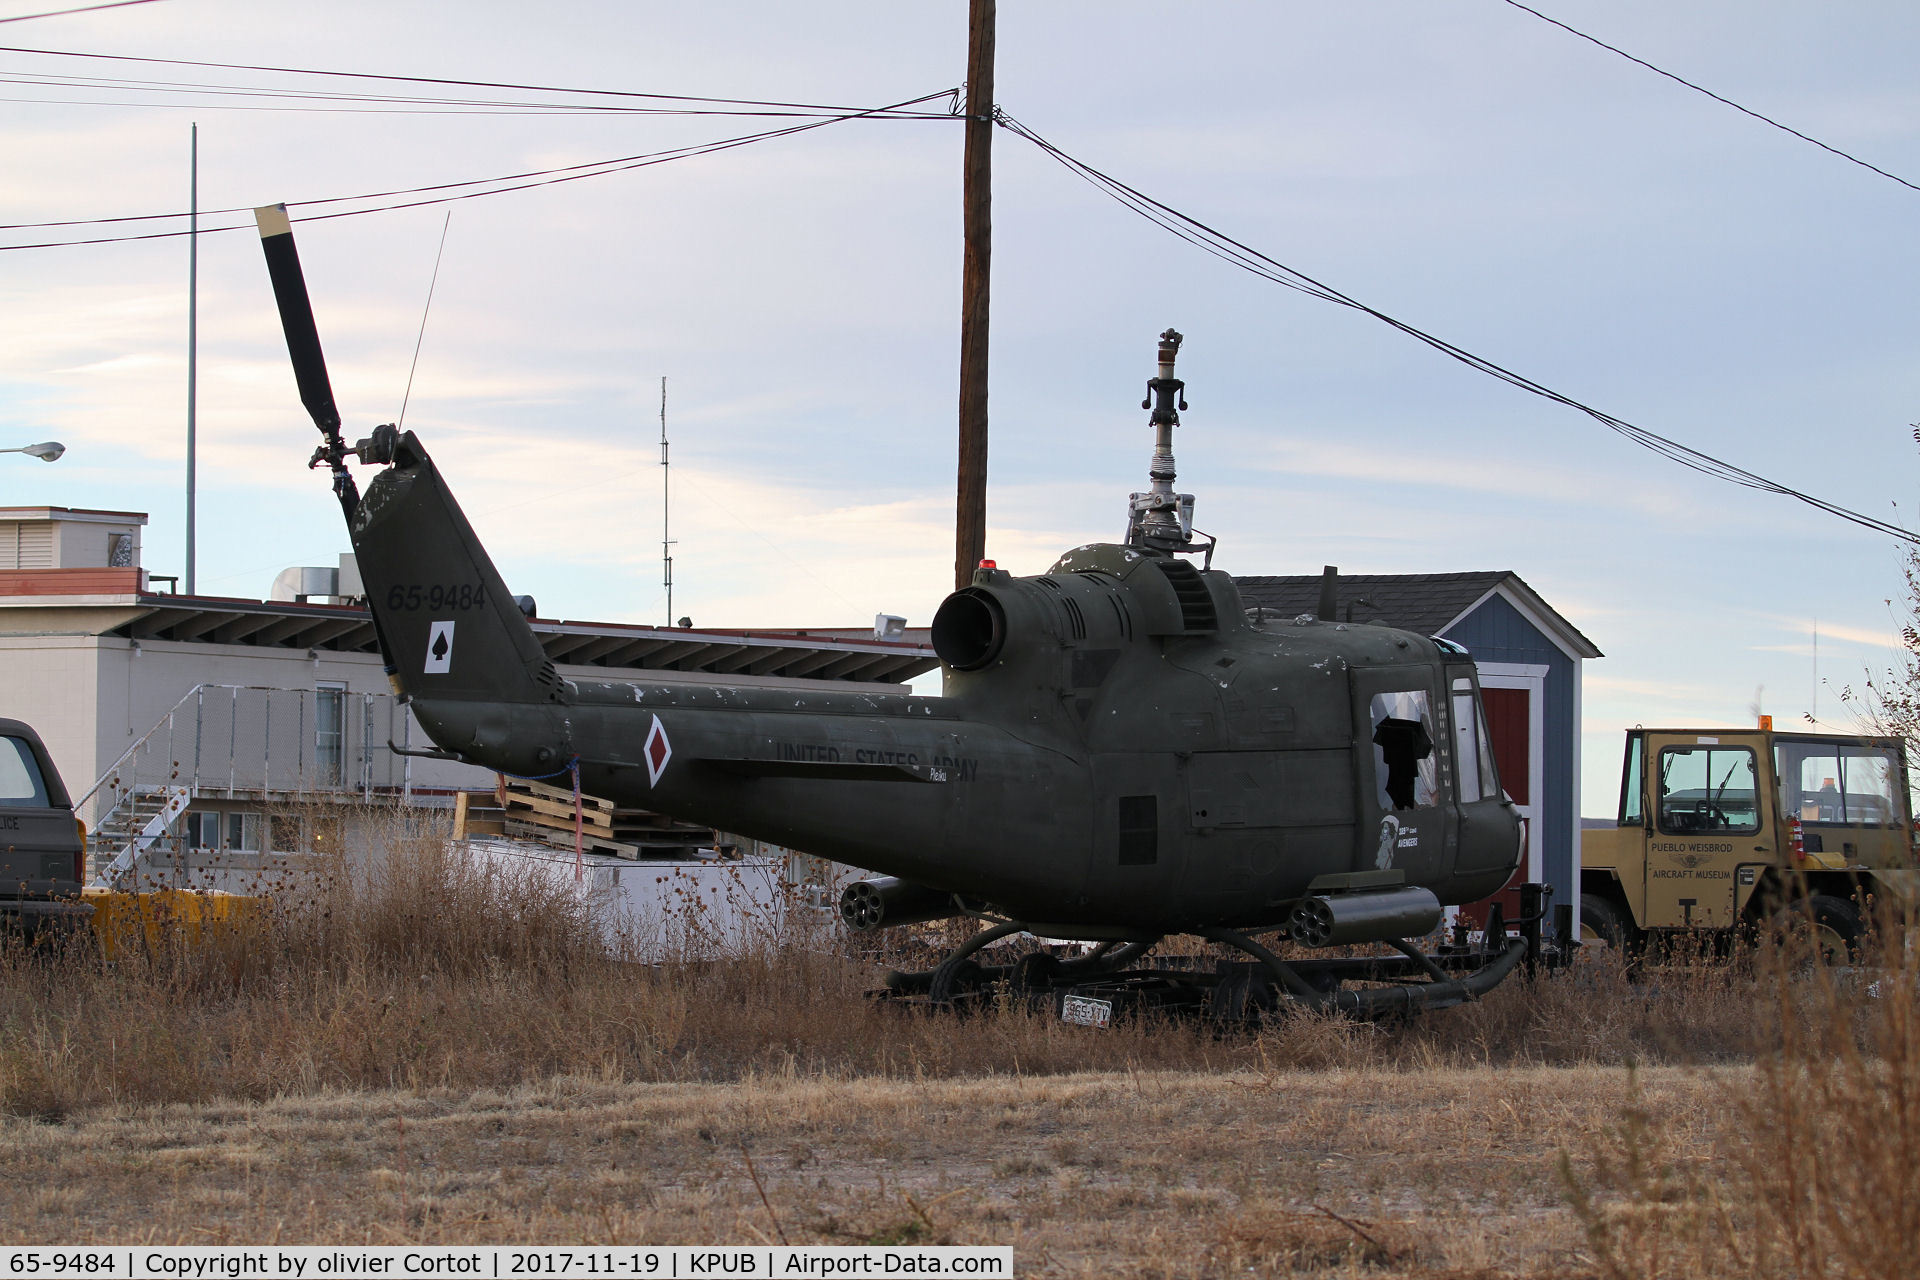 65-9484, 1965 Bell UH-1M Iroquois C/N 1384, not on display any more